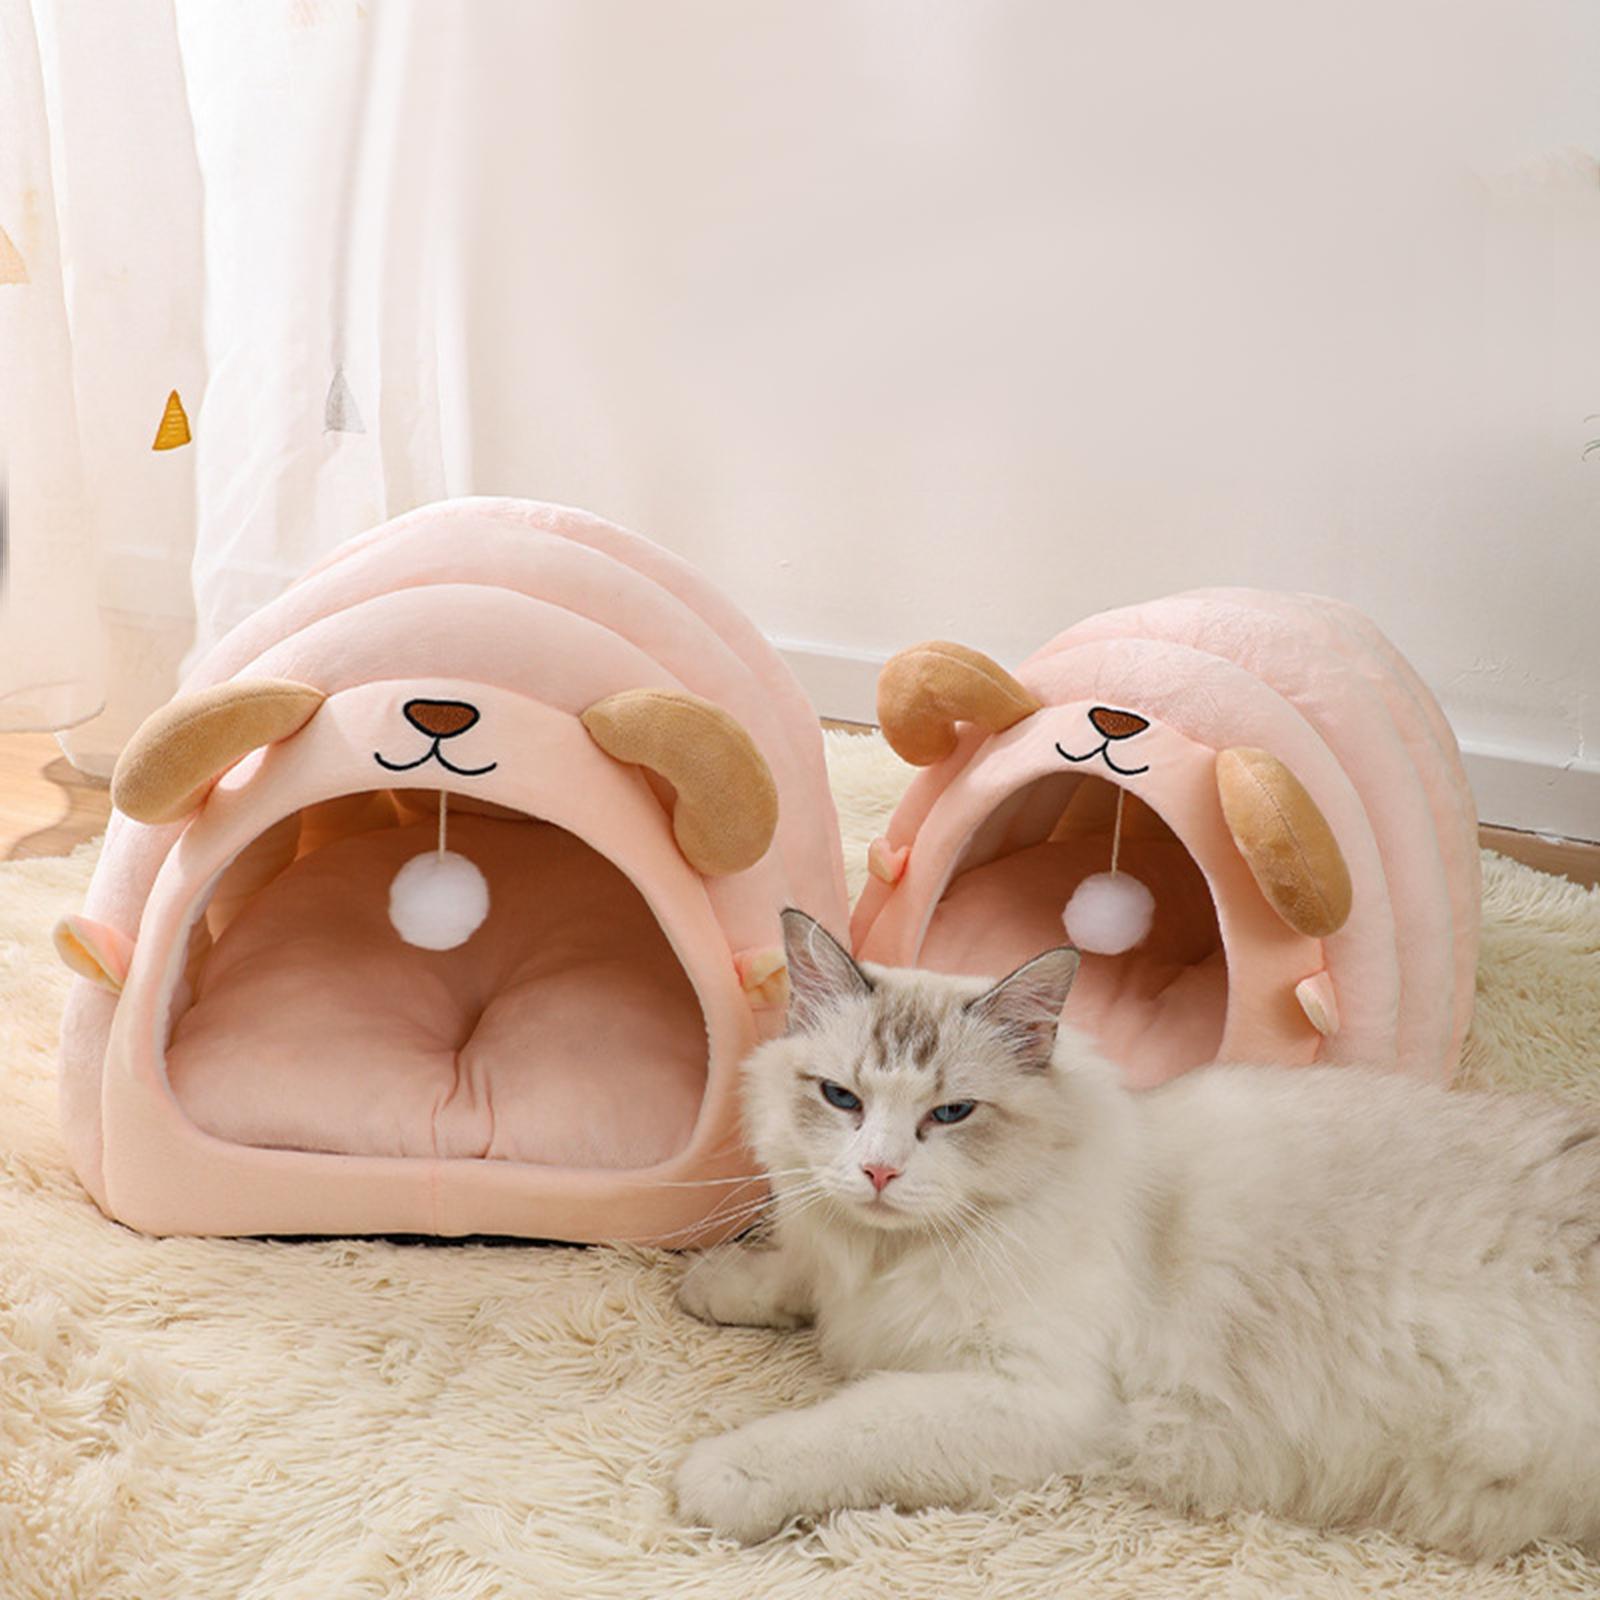 Warm Bed Small Animal Winter House Comfortable Pet Sleeping Bed Washable Cave House for Cats and Small Dogs Outdoor Indoor